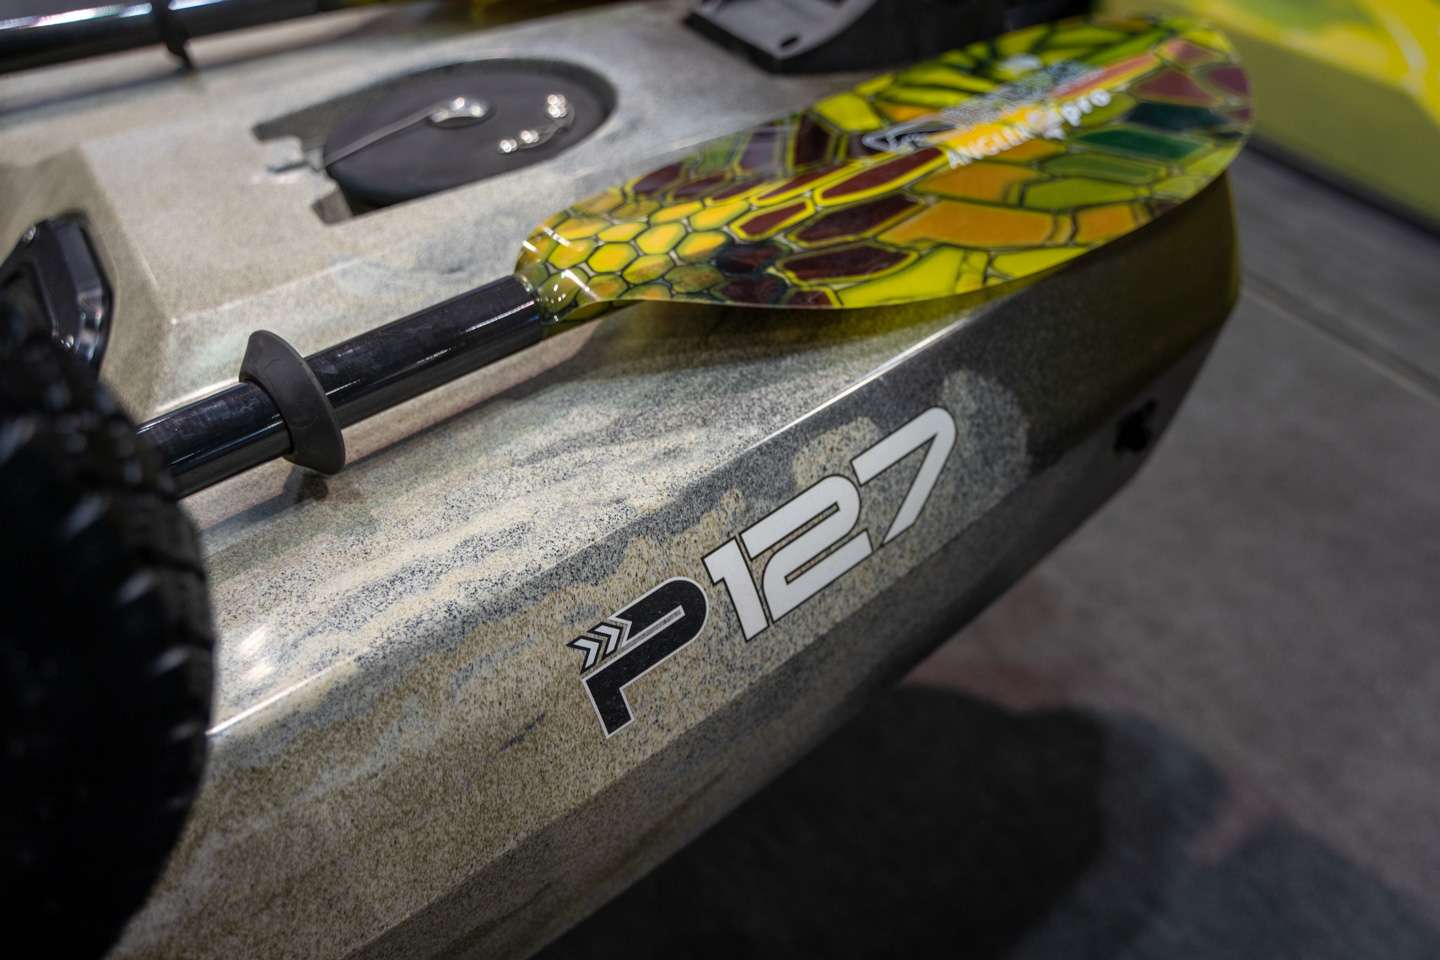 The bottom of the kayak features a brand new rudder called the Spring Blade.